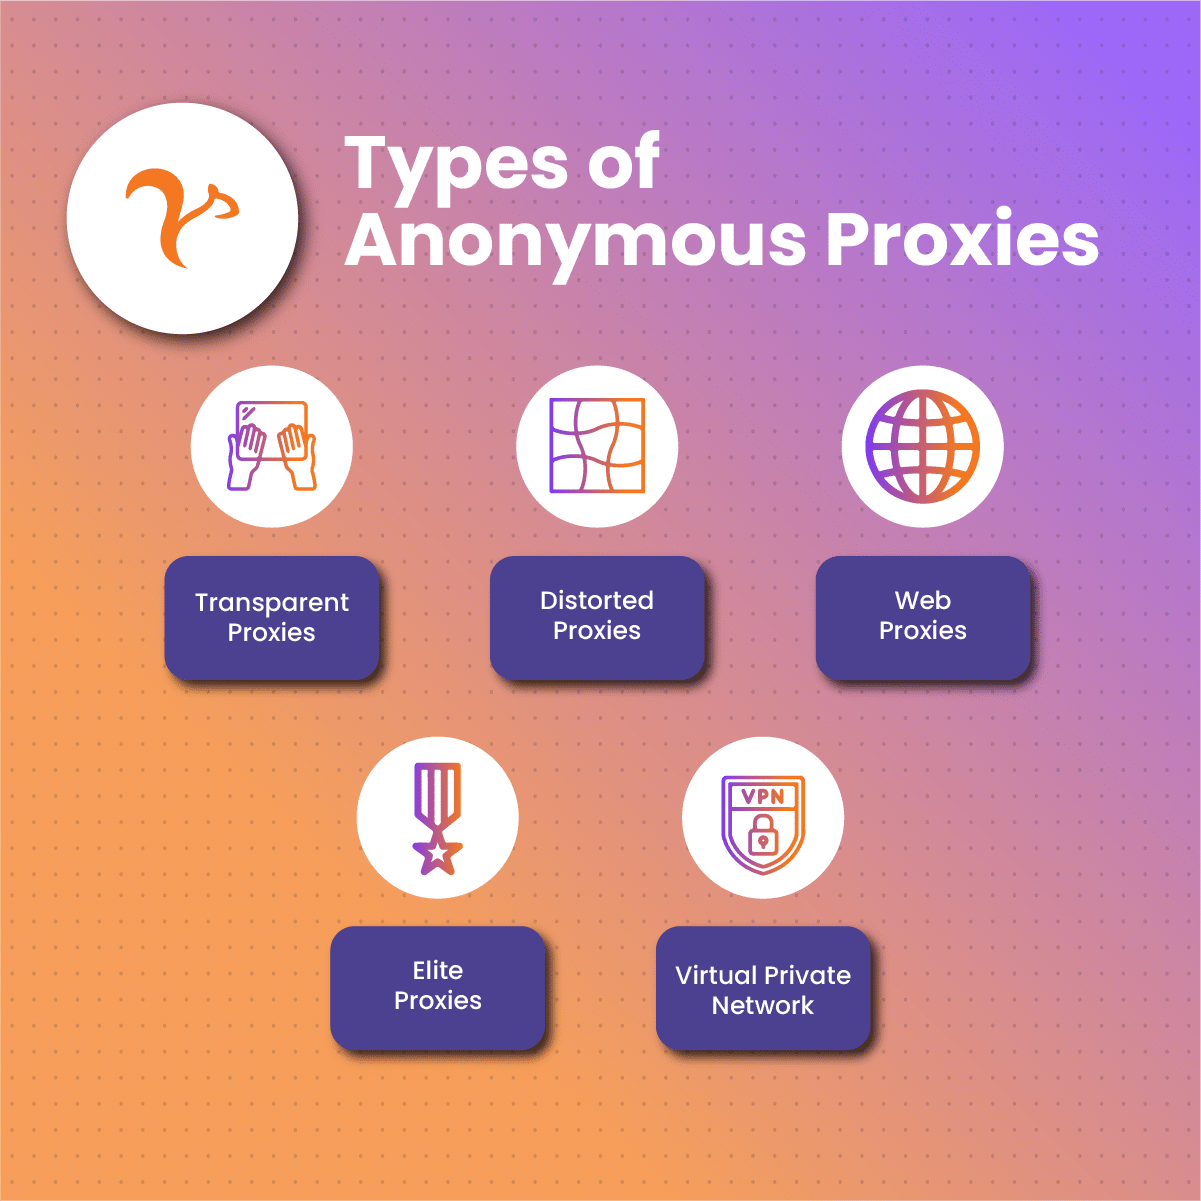 Types of Anonymous Proxies